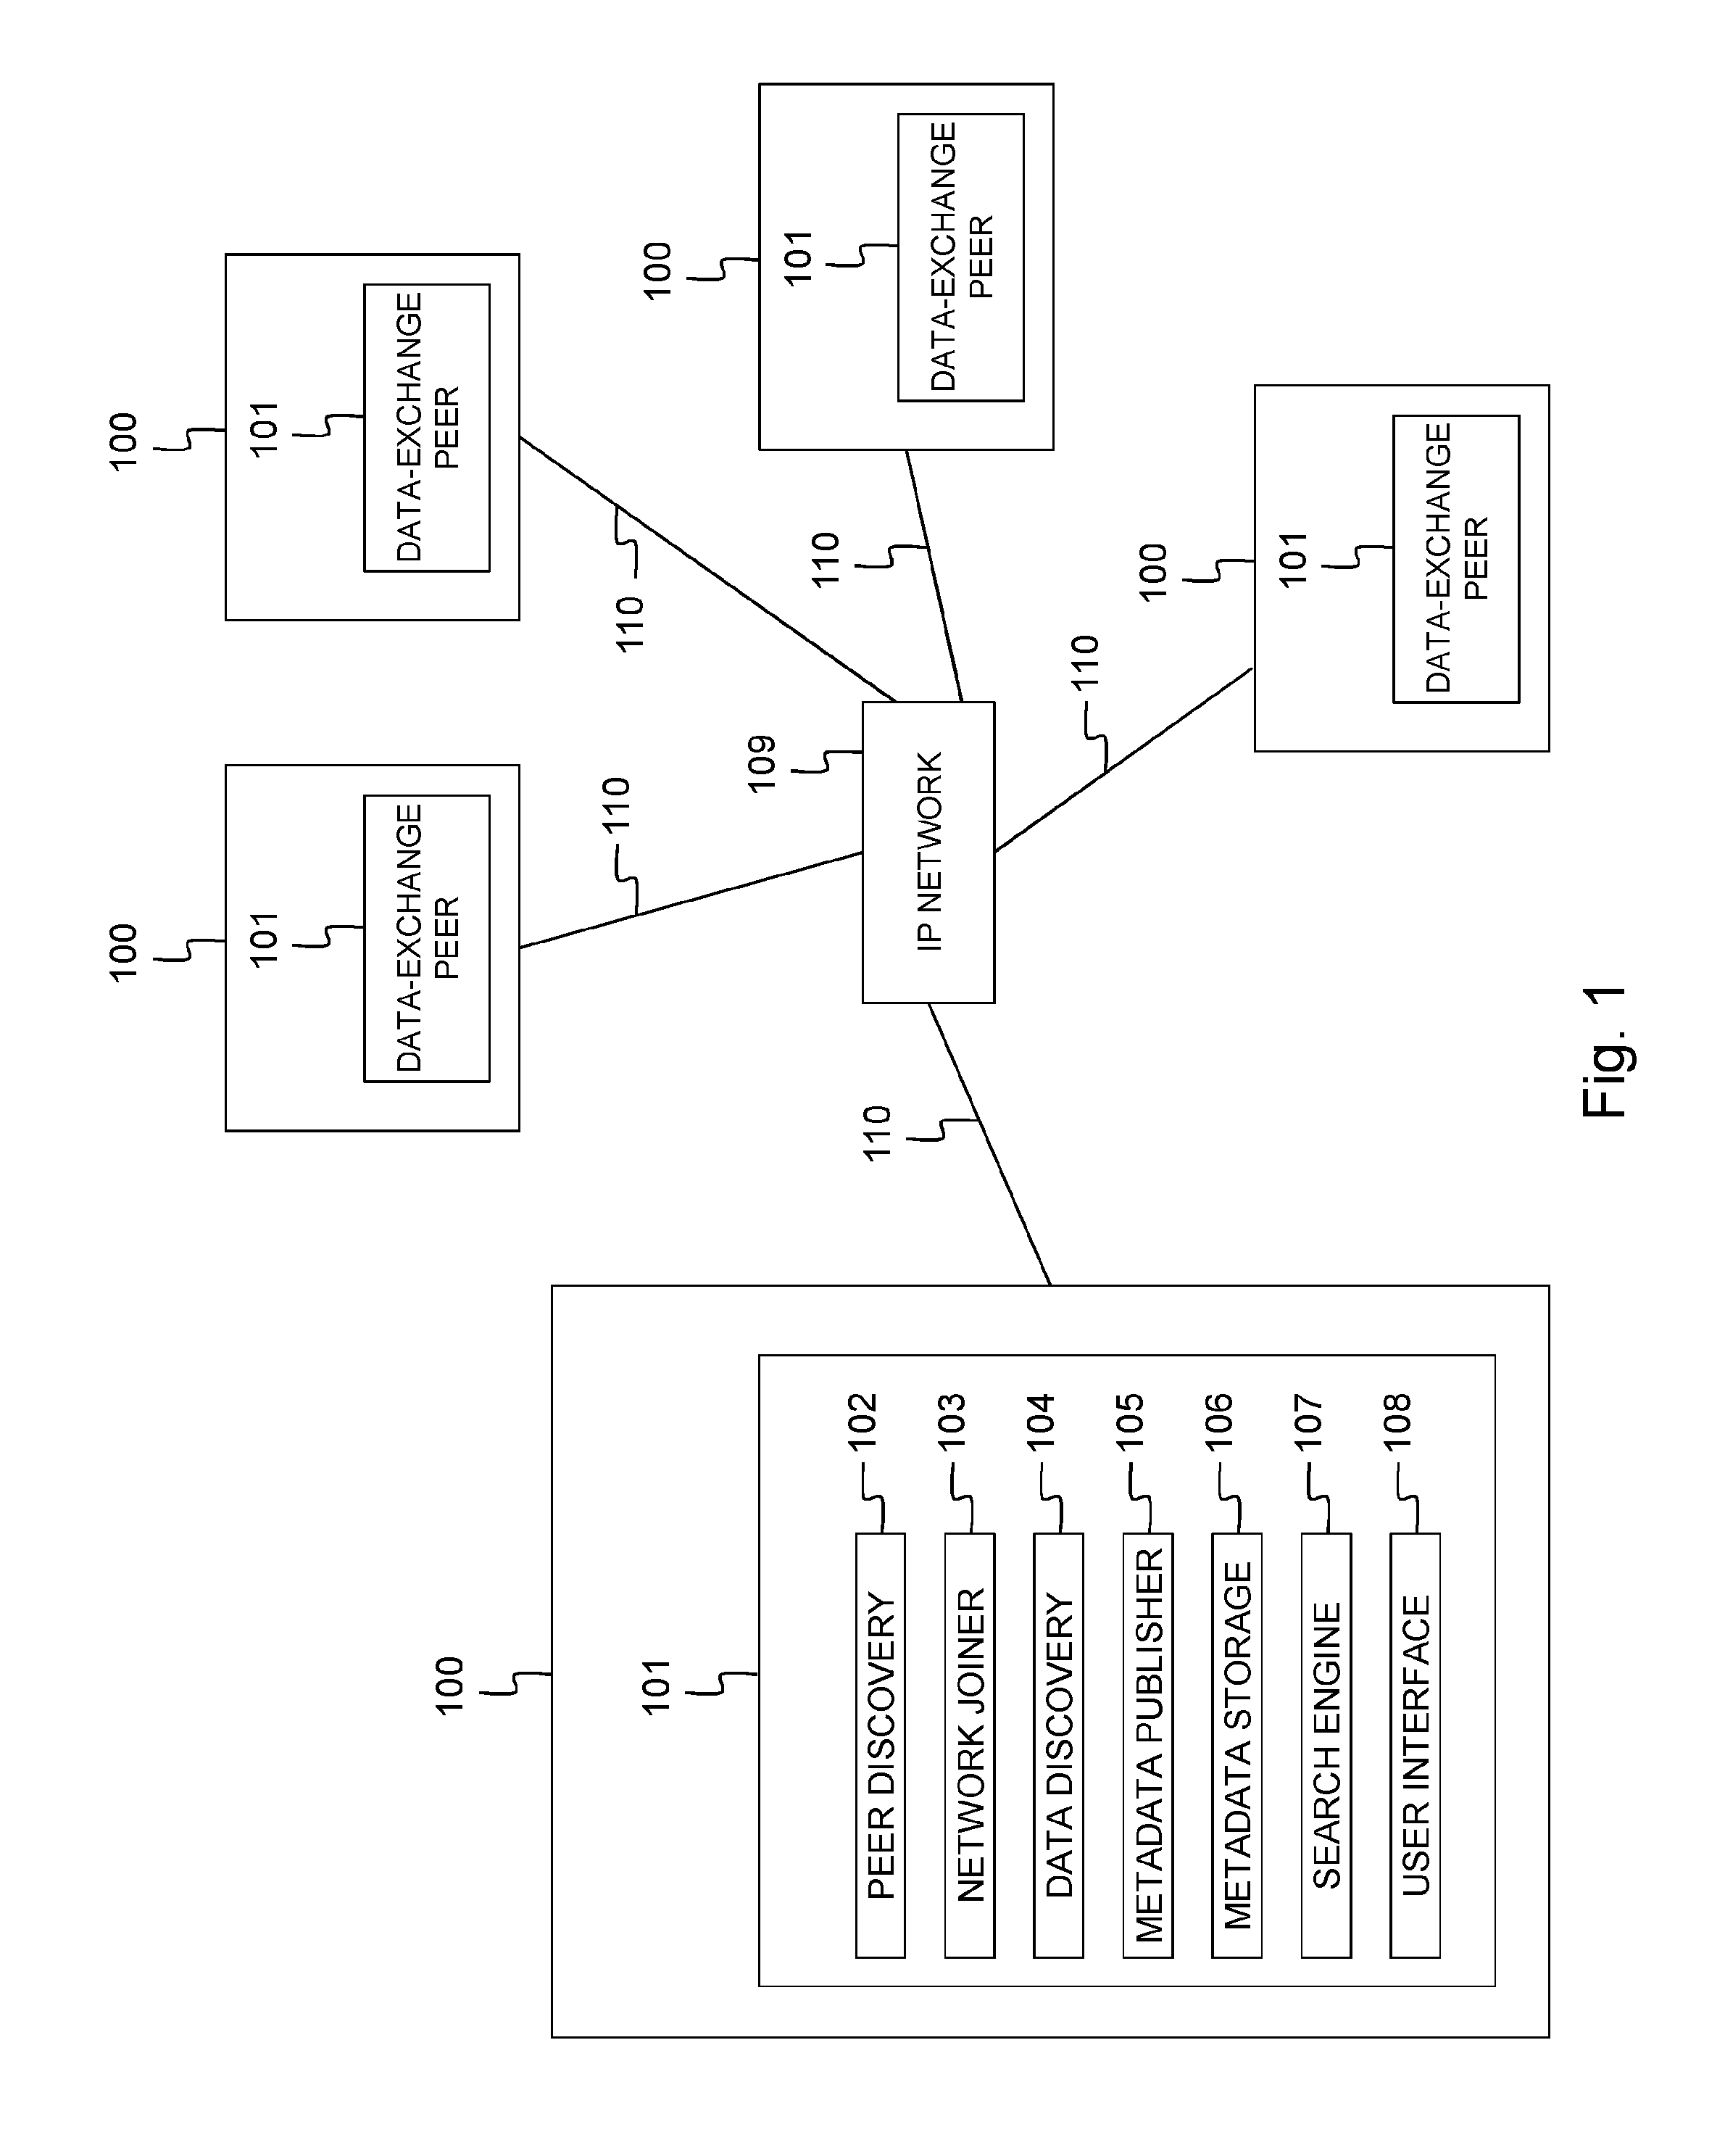 Method for storing and searching tagged content items in a distributed system